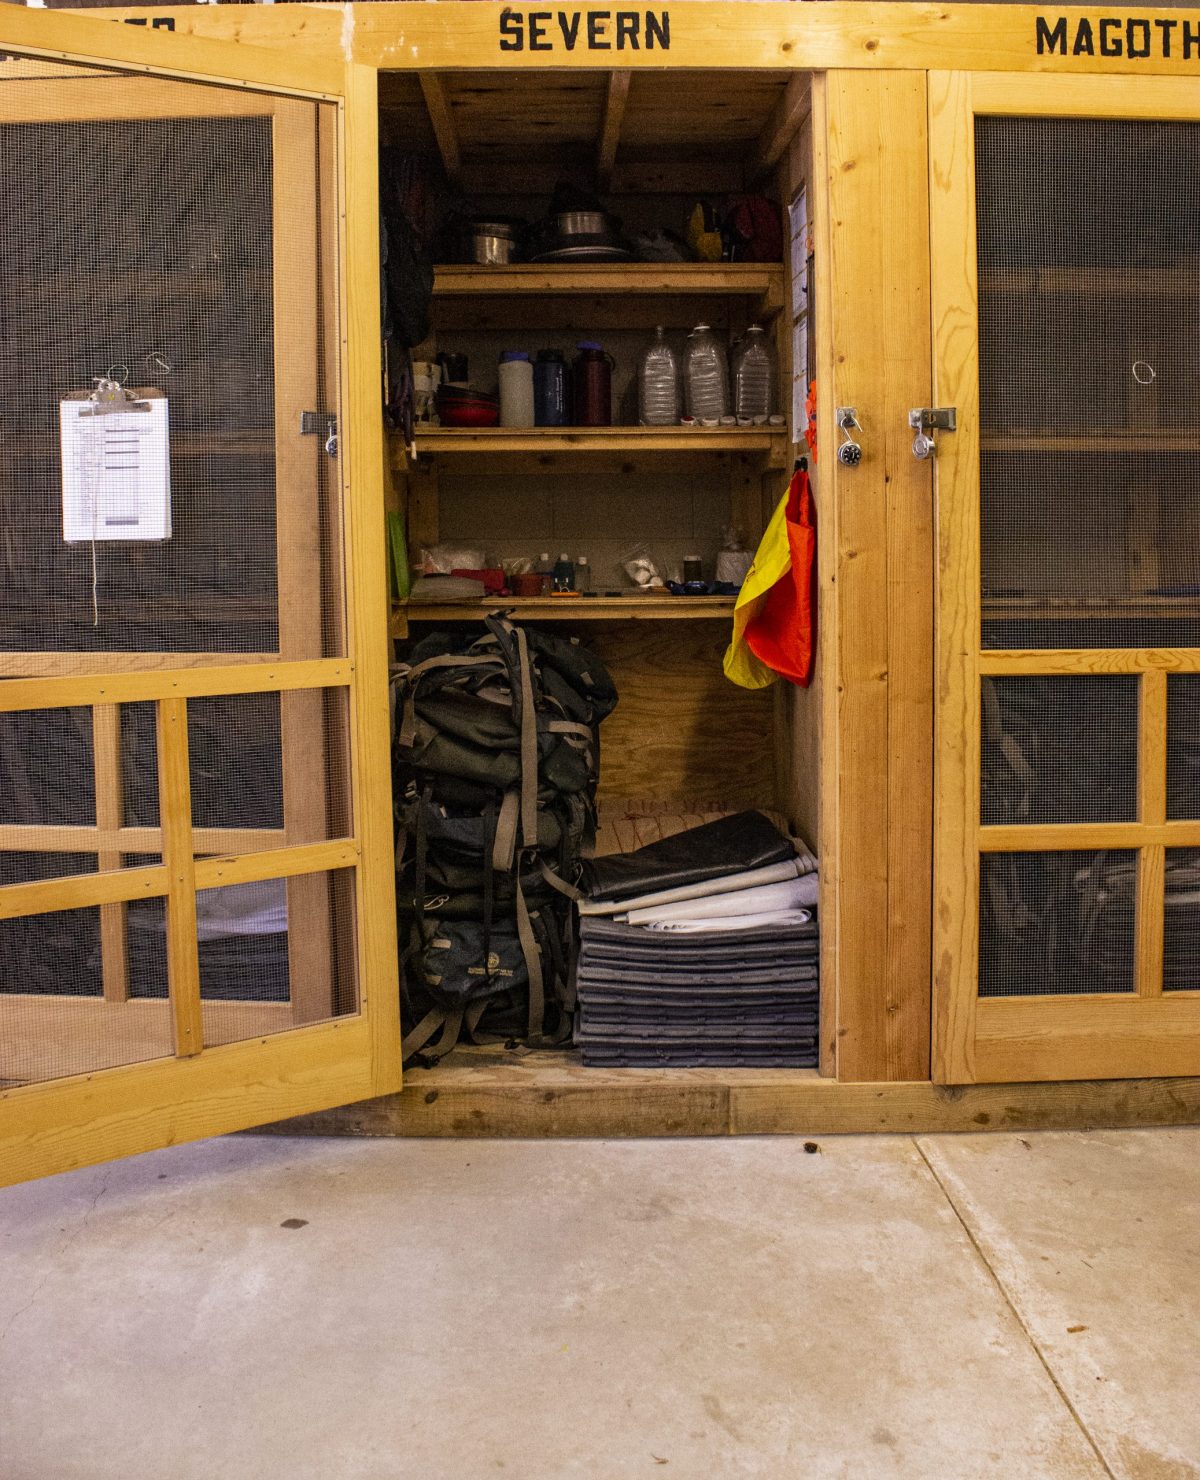 These lockers contain almost all of the gear necessary for an Outward Bound expedition.